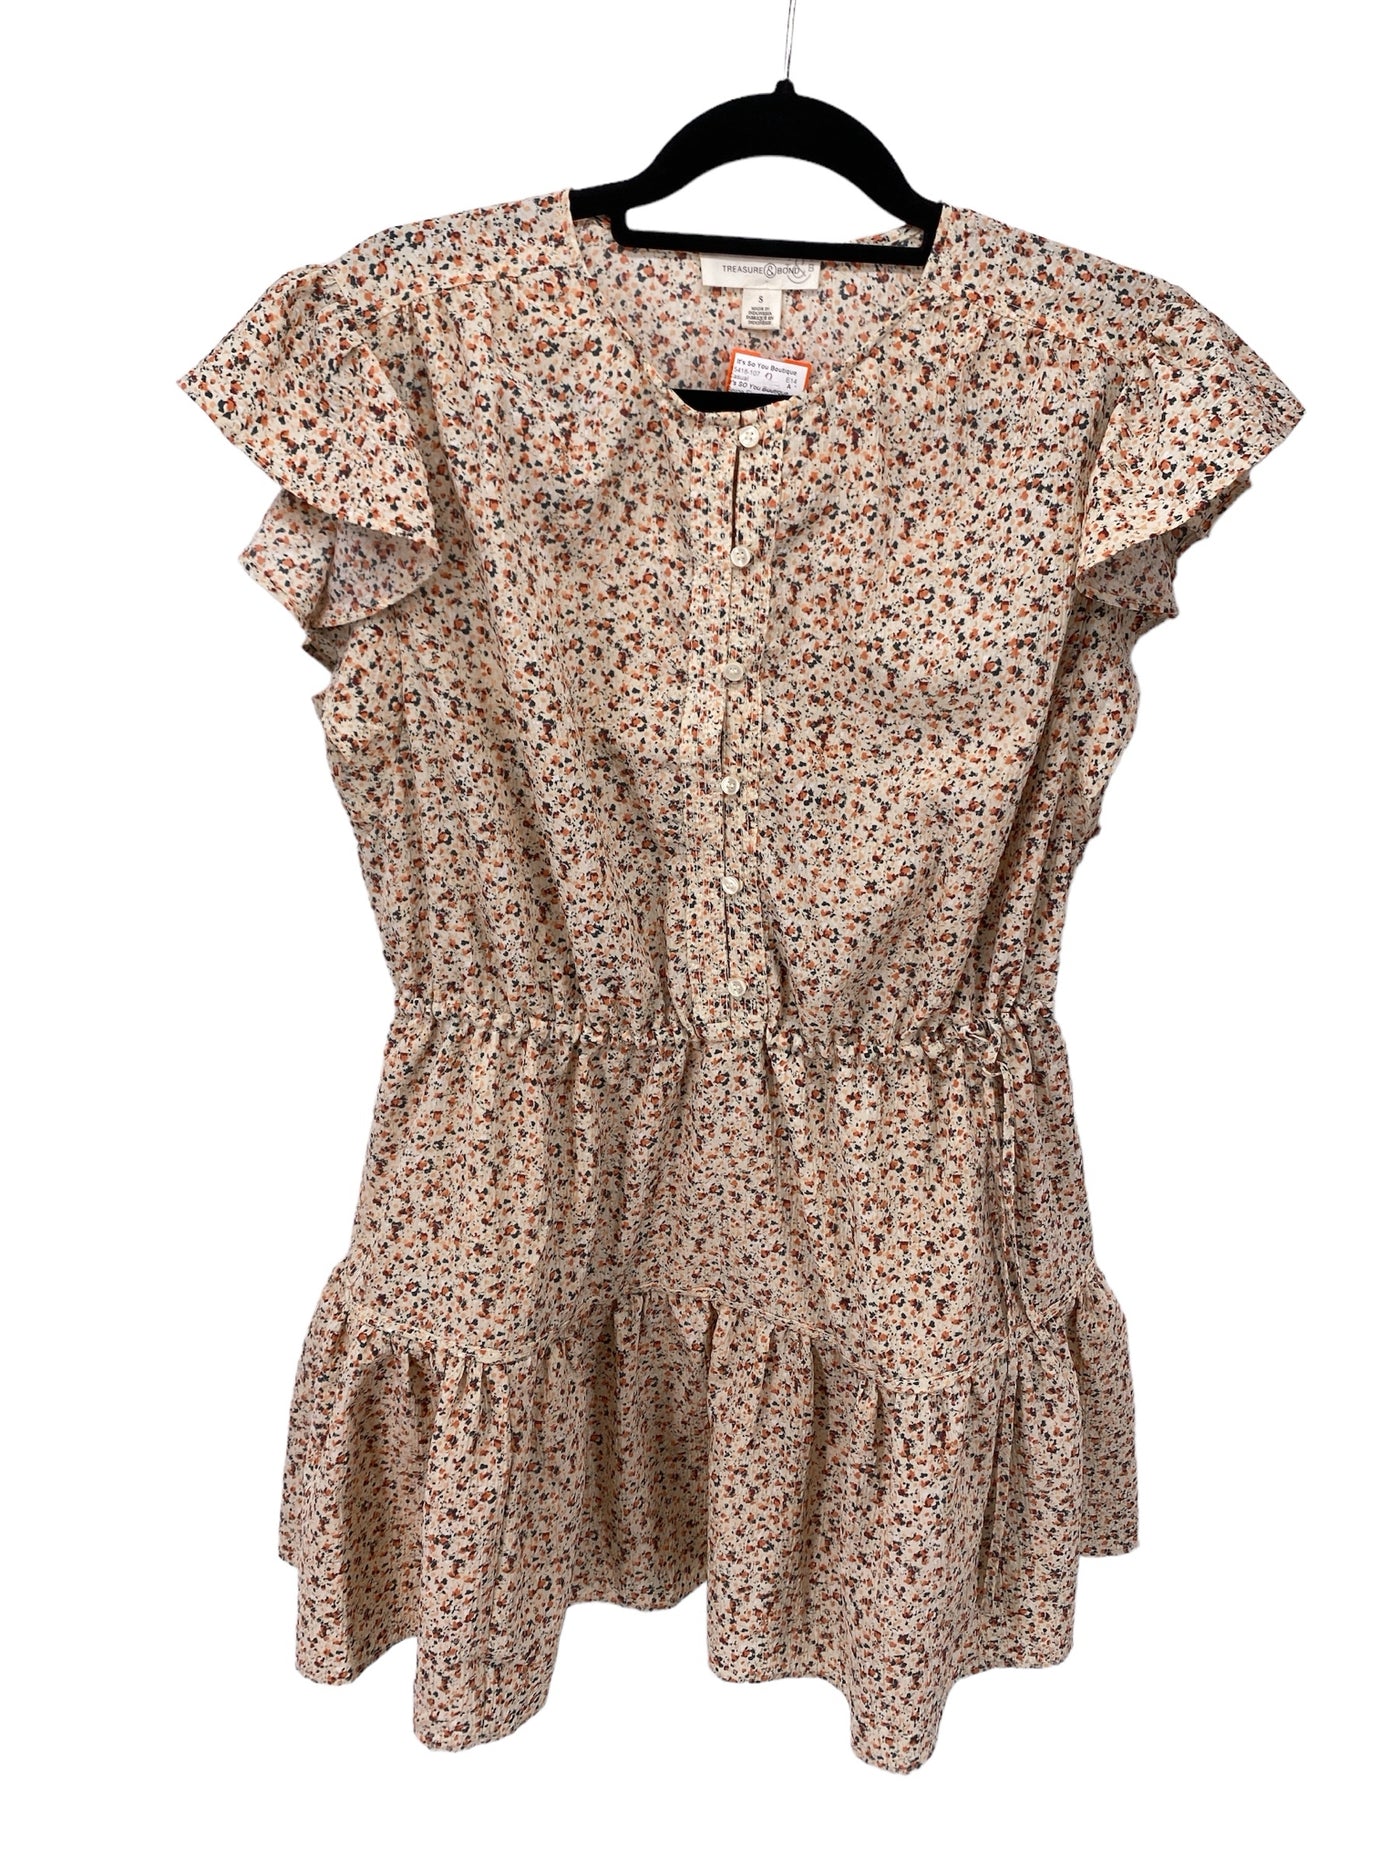 It's SO You Boutique Misses Size Small Beige Floral Casual